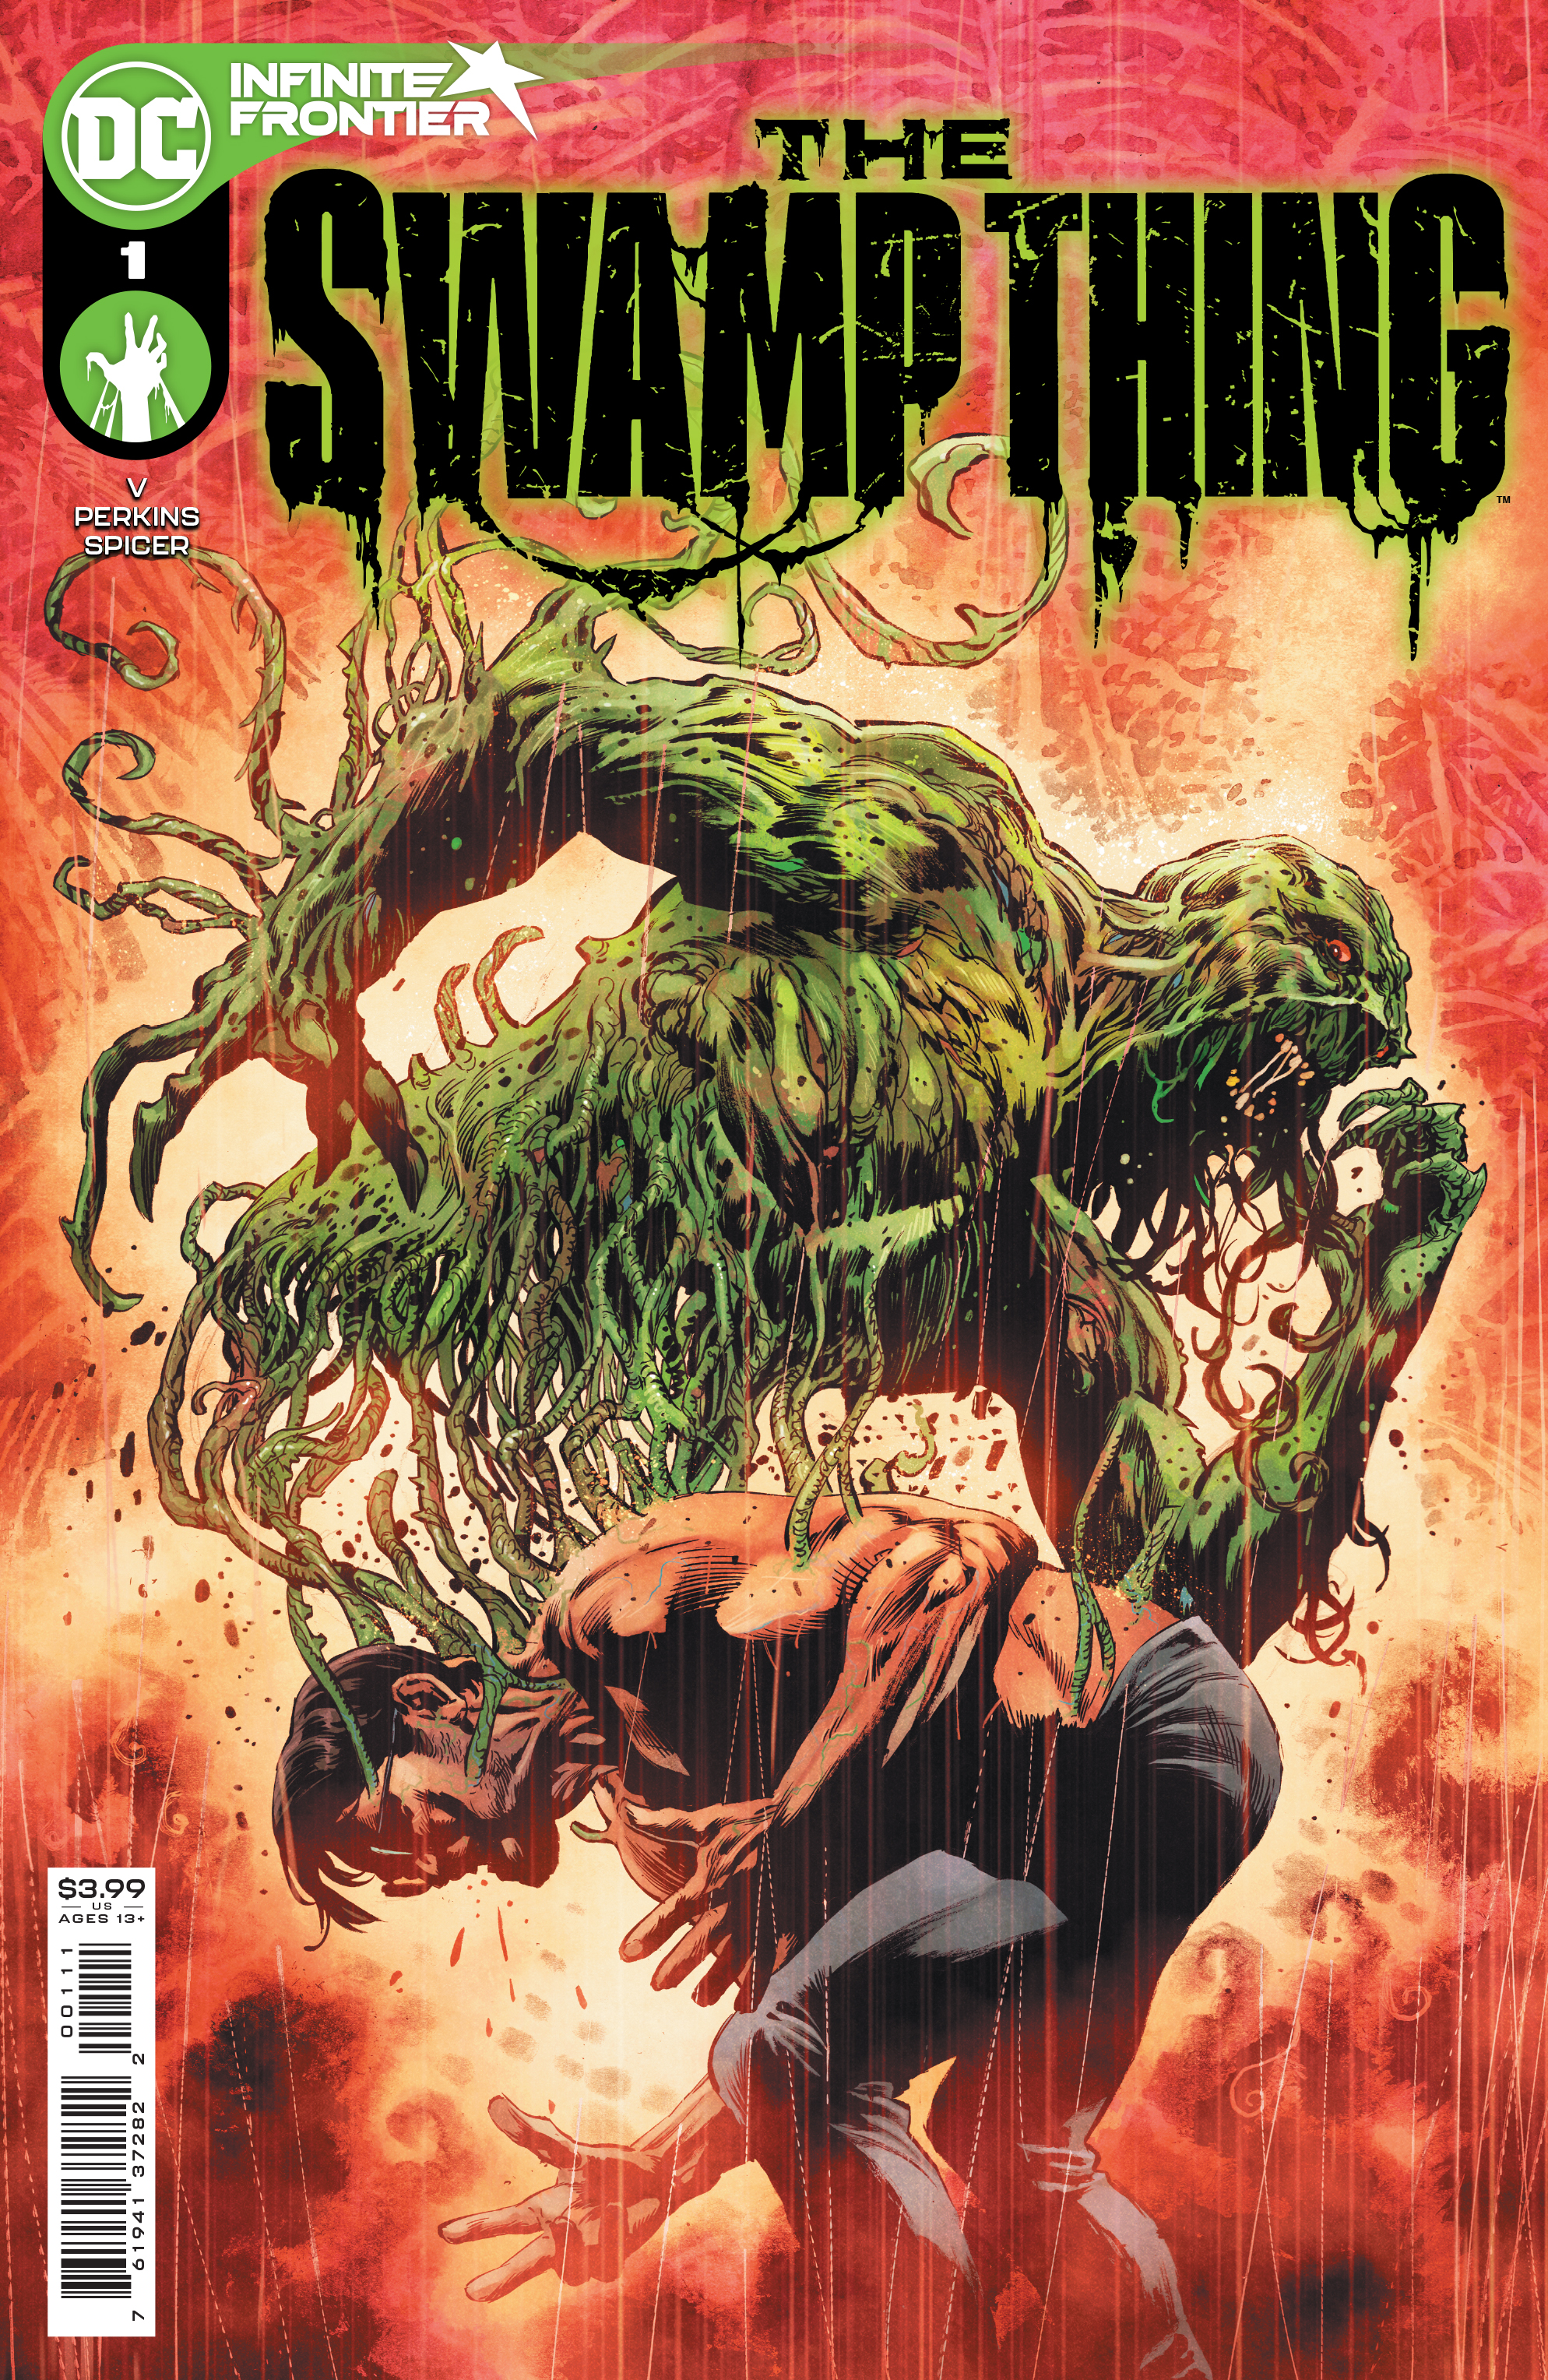 Swamp Thing #1 (Of 10) Cover A Mike Perkins (2021)